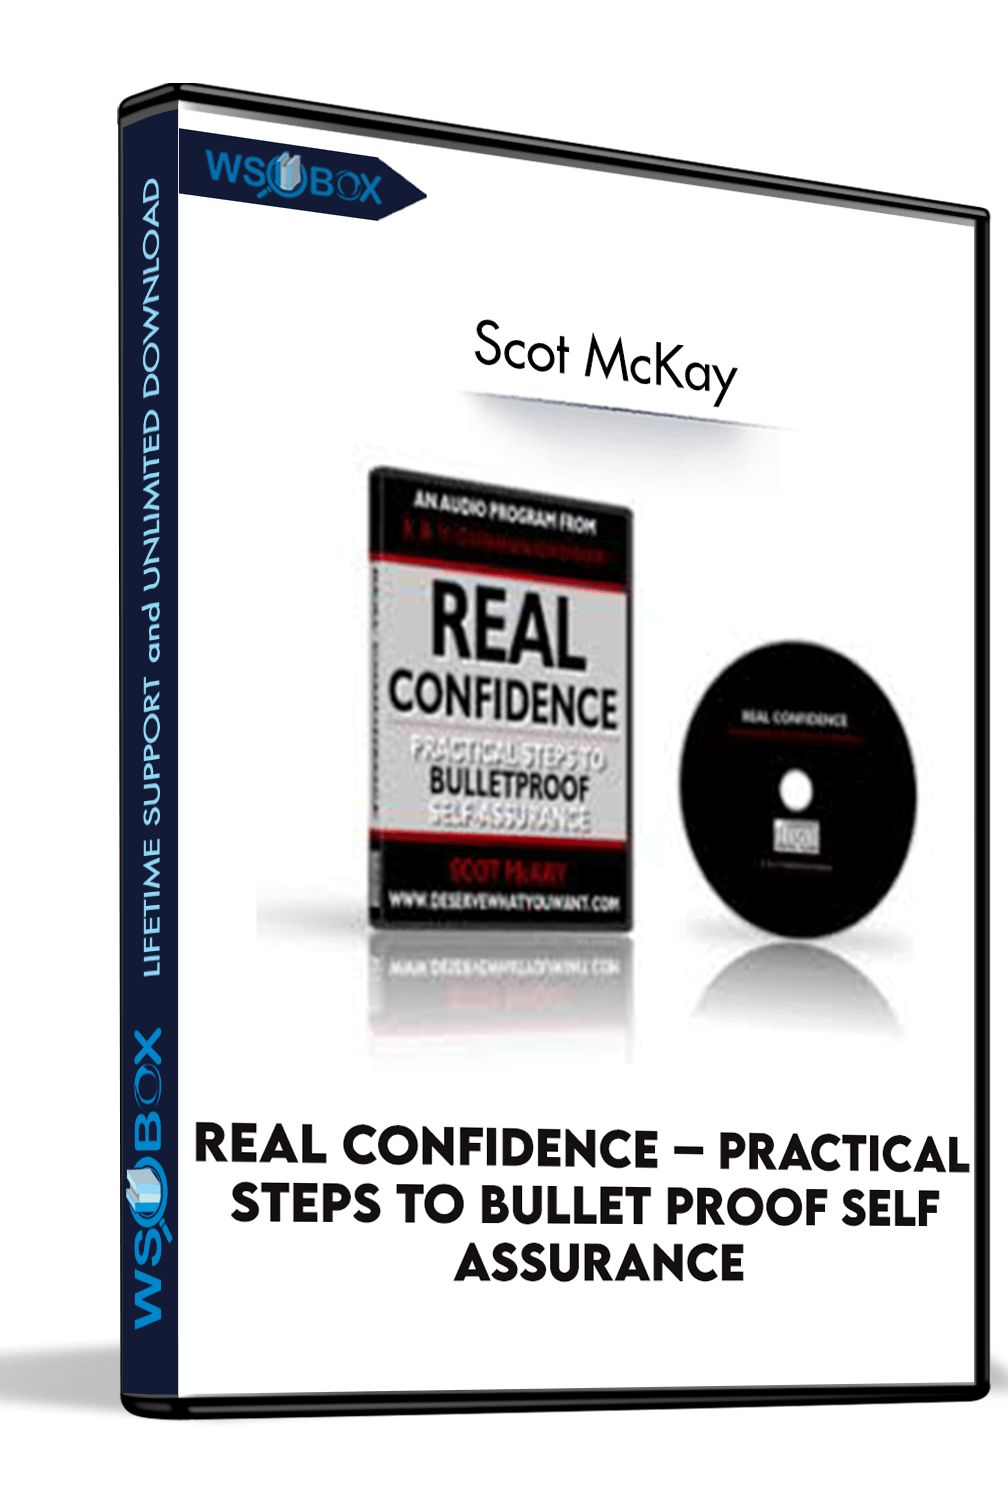 real-confidence-practical-steps-to-bullet-proof-self-assurance-scot-mckay